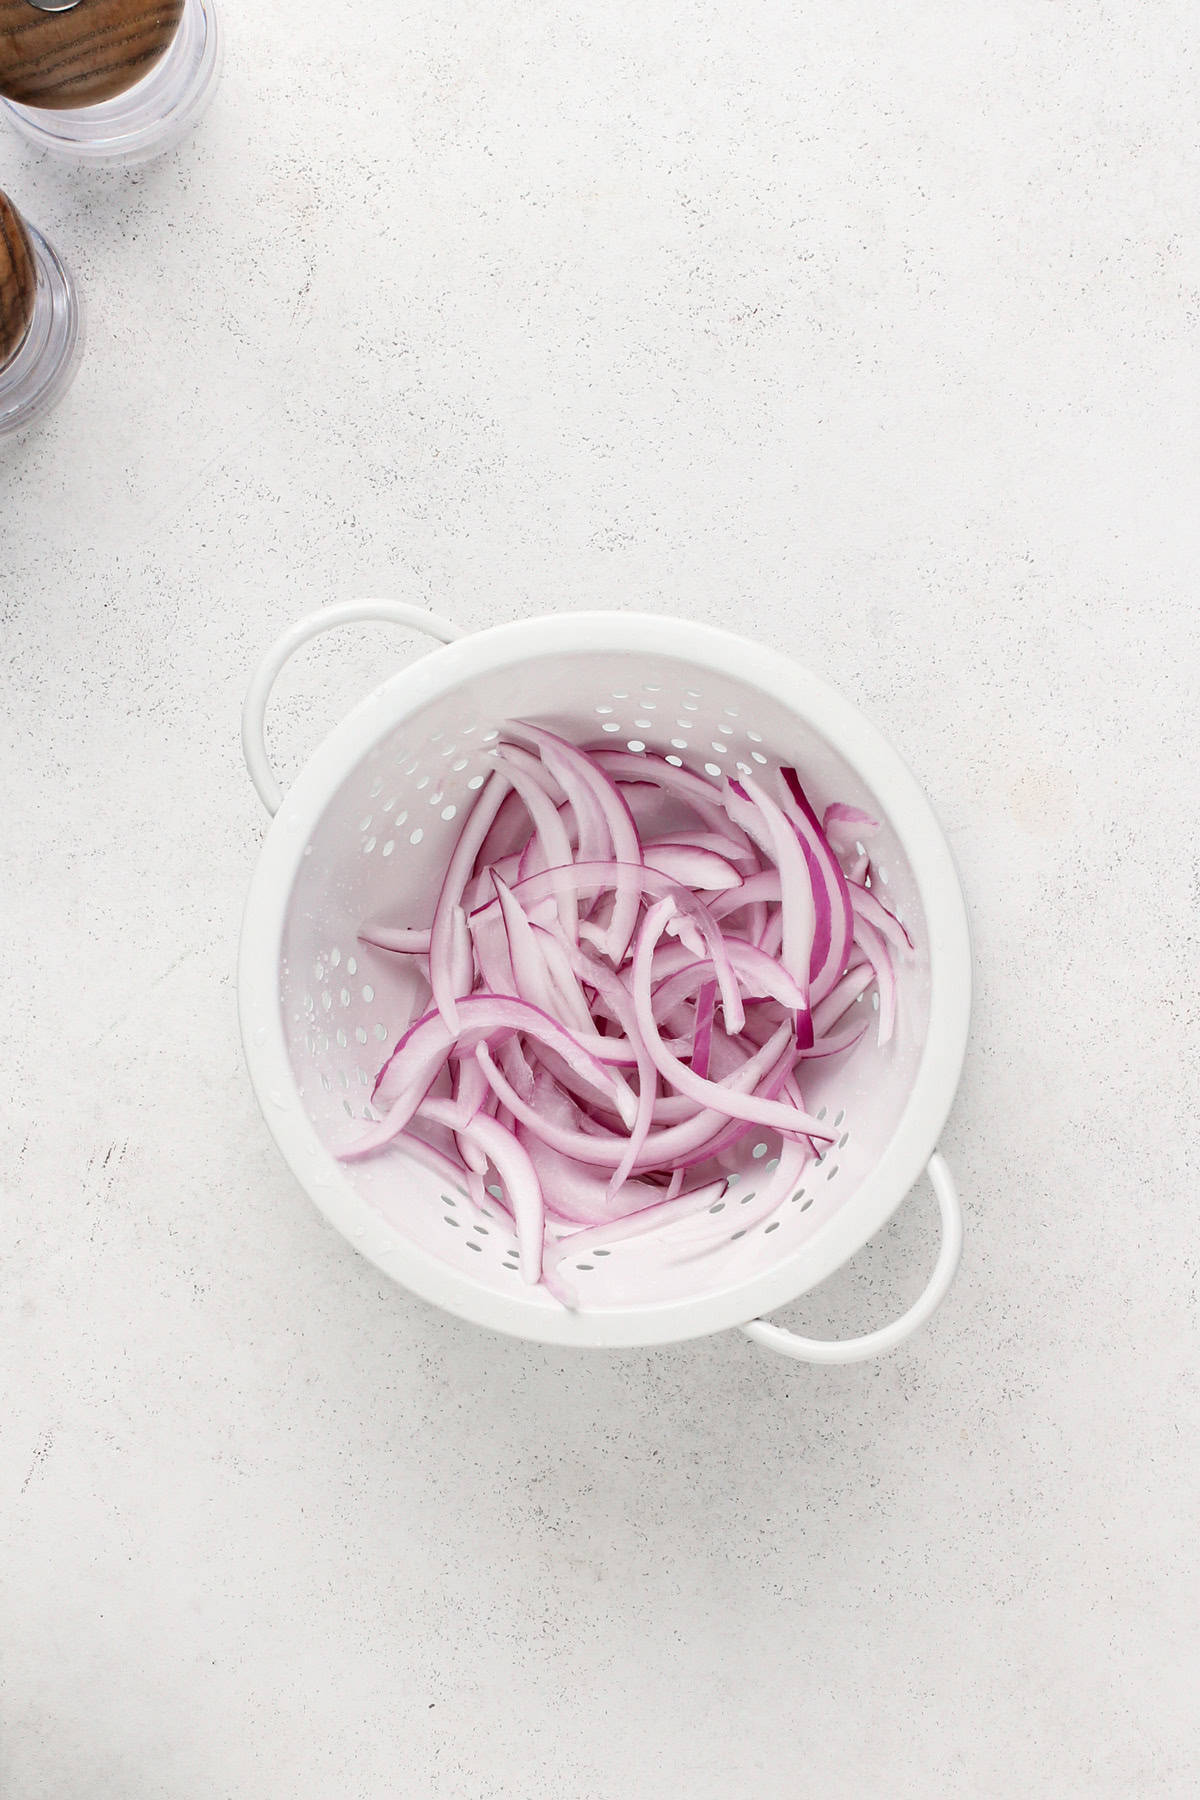 Sliced red onion rinsed with water in a white colander.